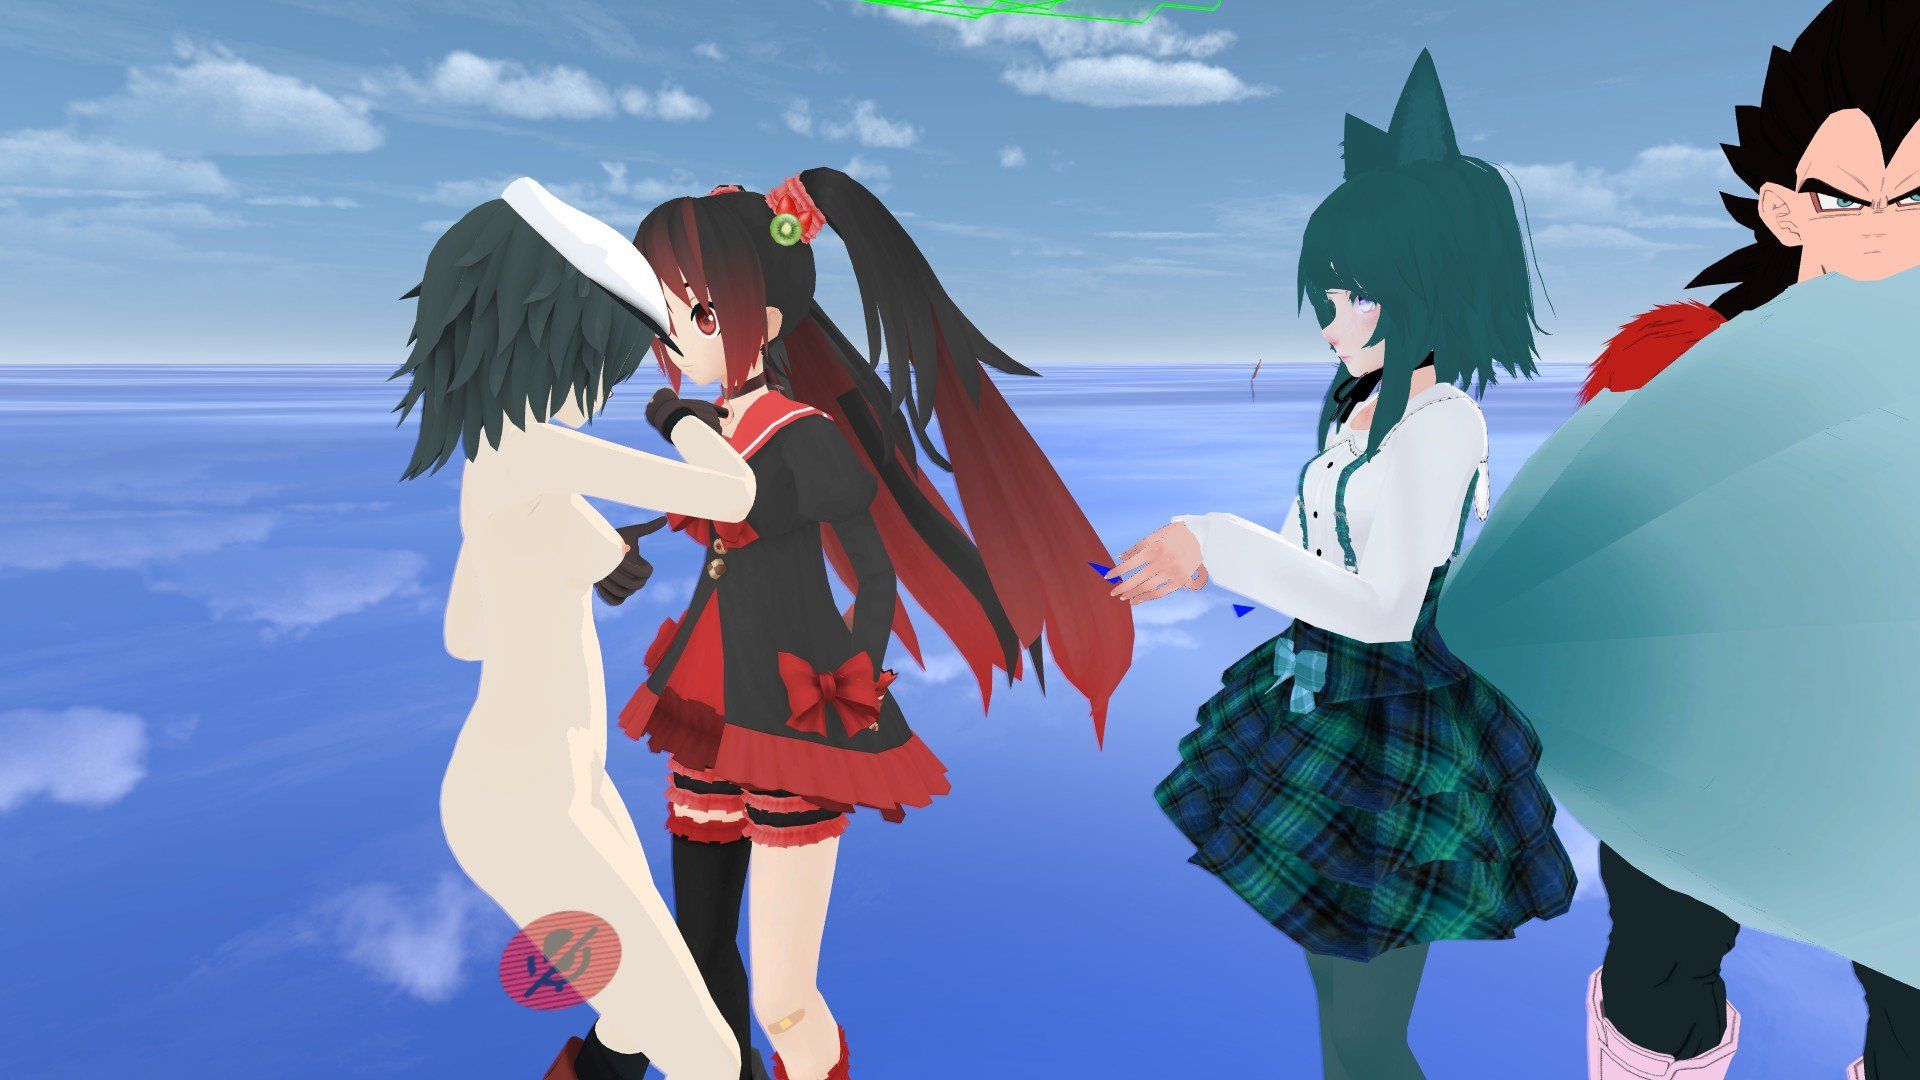 Grand S. reccomend naked vrchat